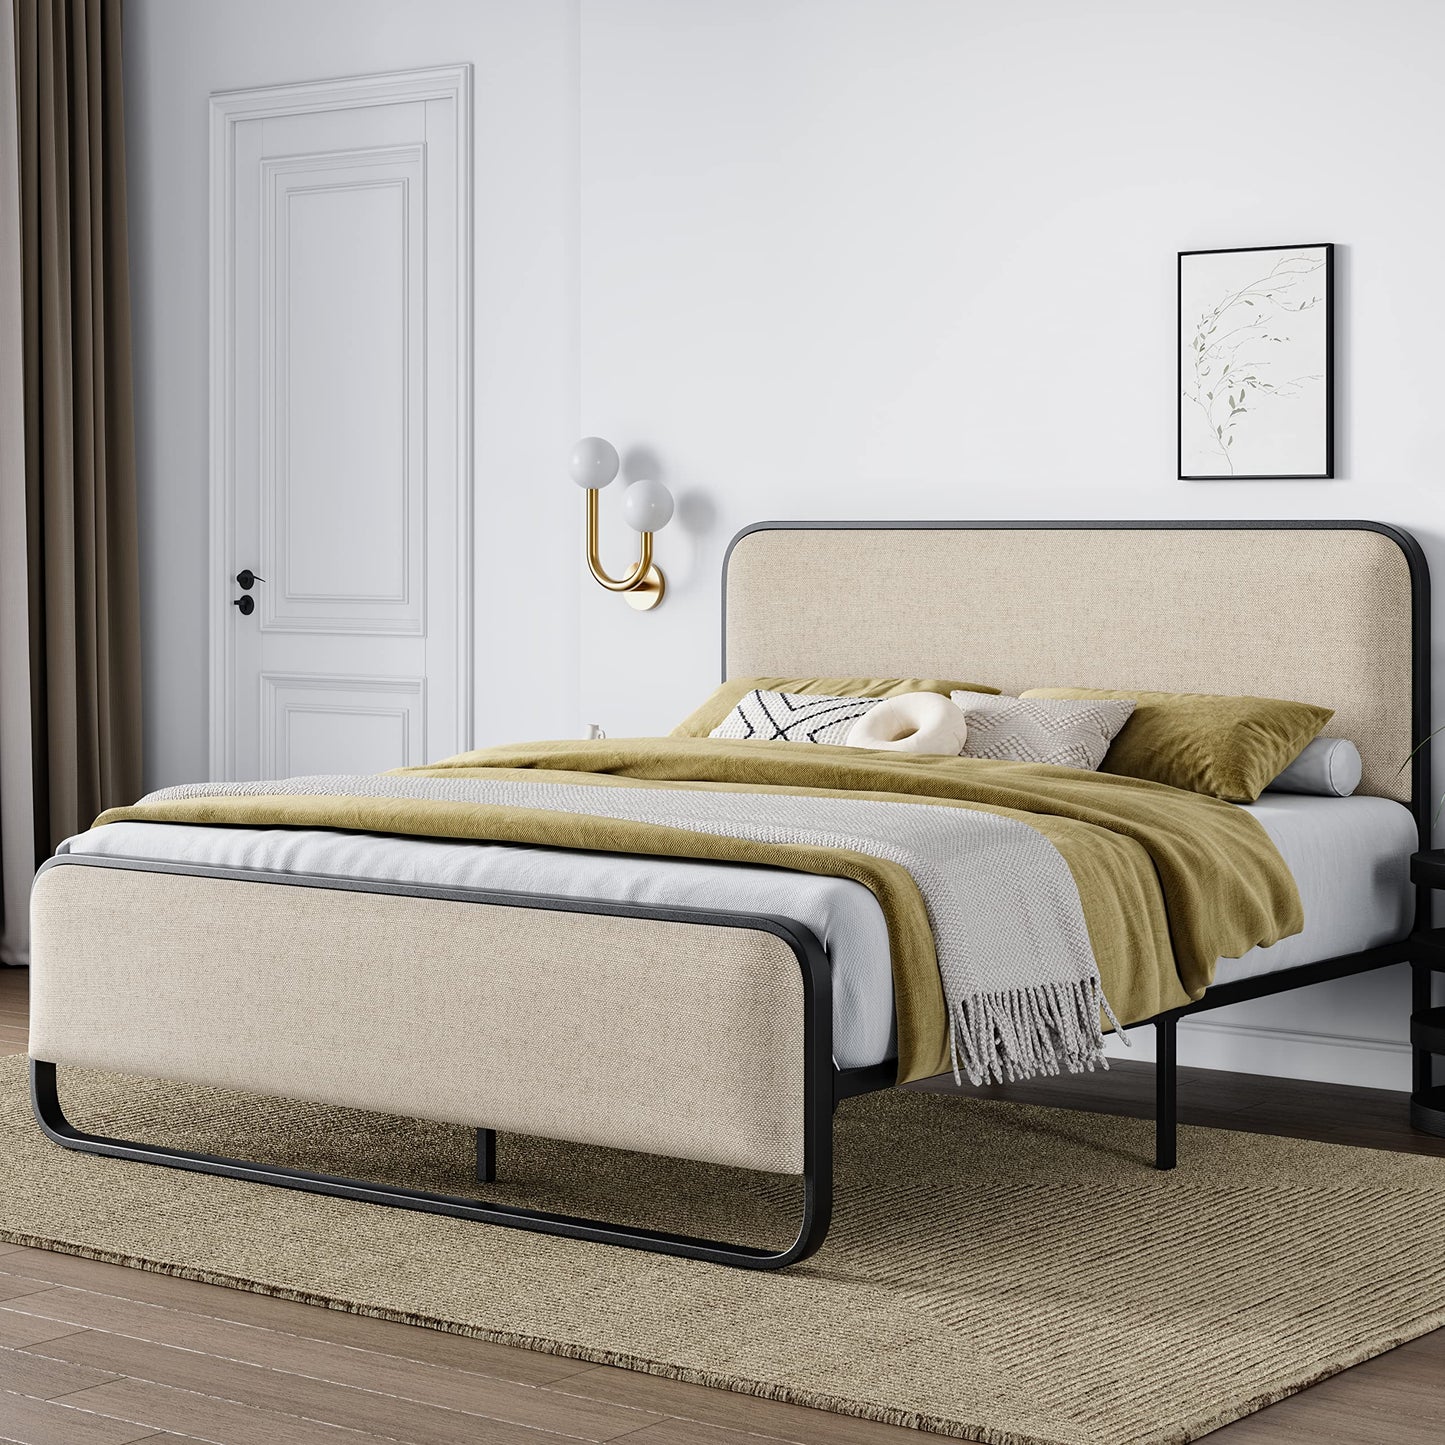 Allewie Queen Size Metal Bed Frame with Curved Upholstered Headboard and Footboard, Platform Bed Frame with Under Bed Storage, No Box Spring Needed, Vintage, Beige